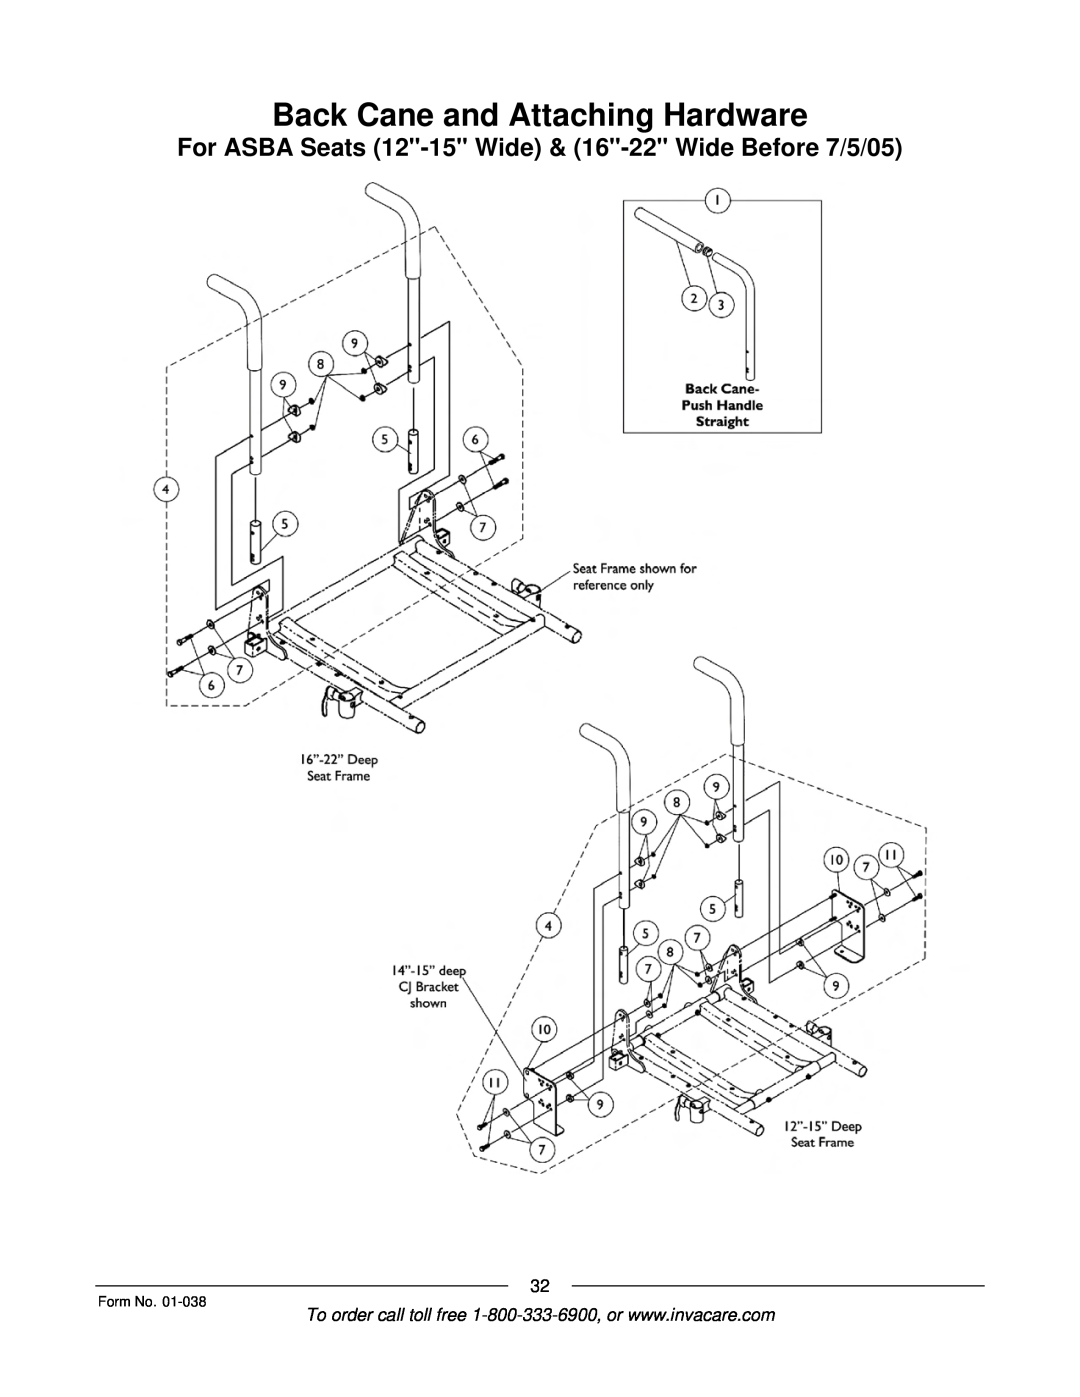 Invacare ESS-PTO, PTO-STM Back Cane and Attaching Hardware, For ASBA Seats 12-15 Wide & 16-22 Wide Before 7/5/05, Form No 